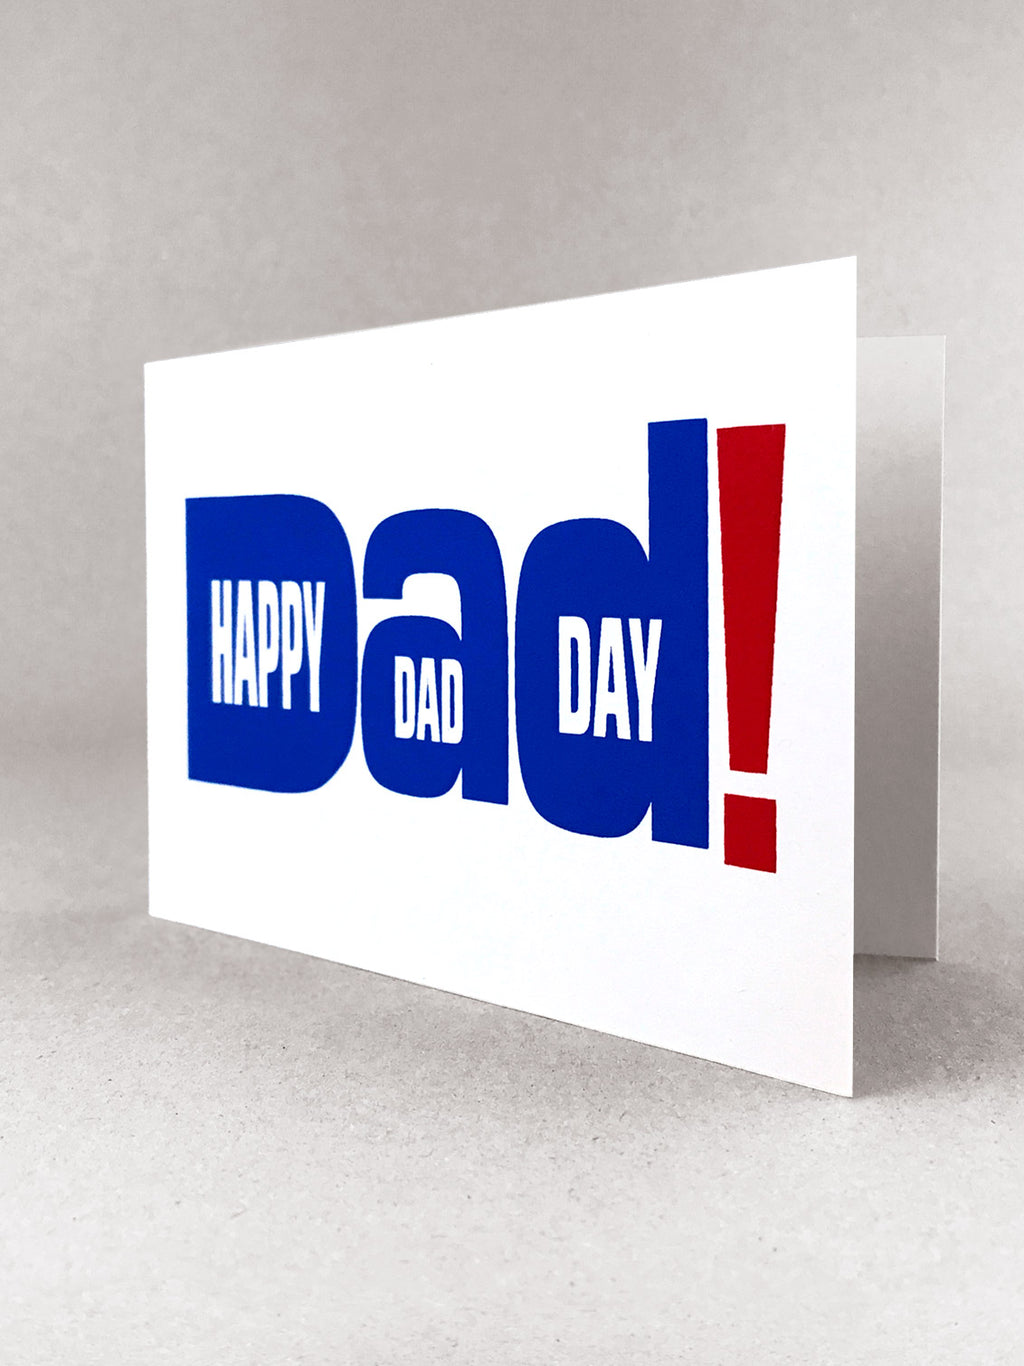 Salty’s Online 
Happy Dad Day card